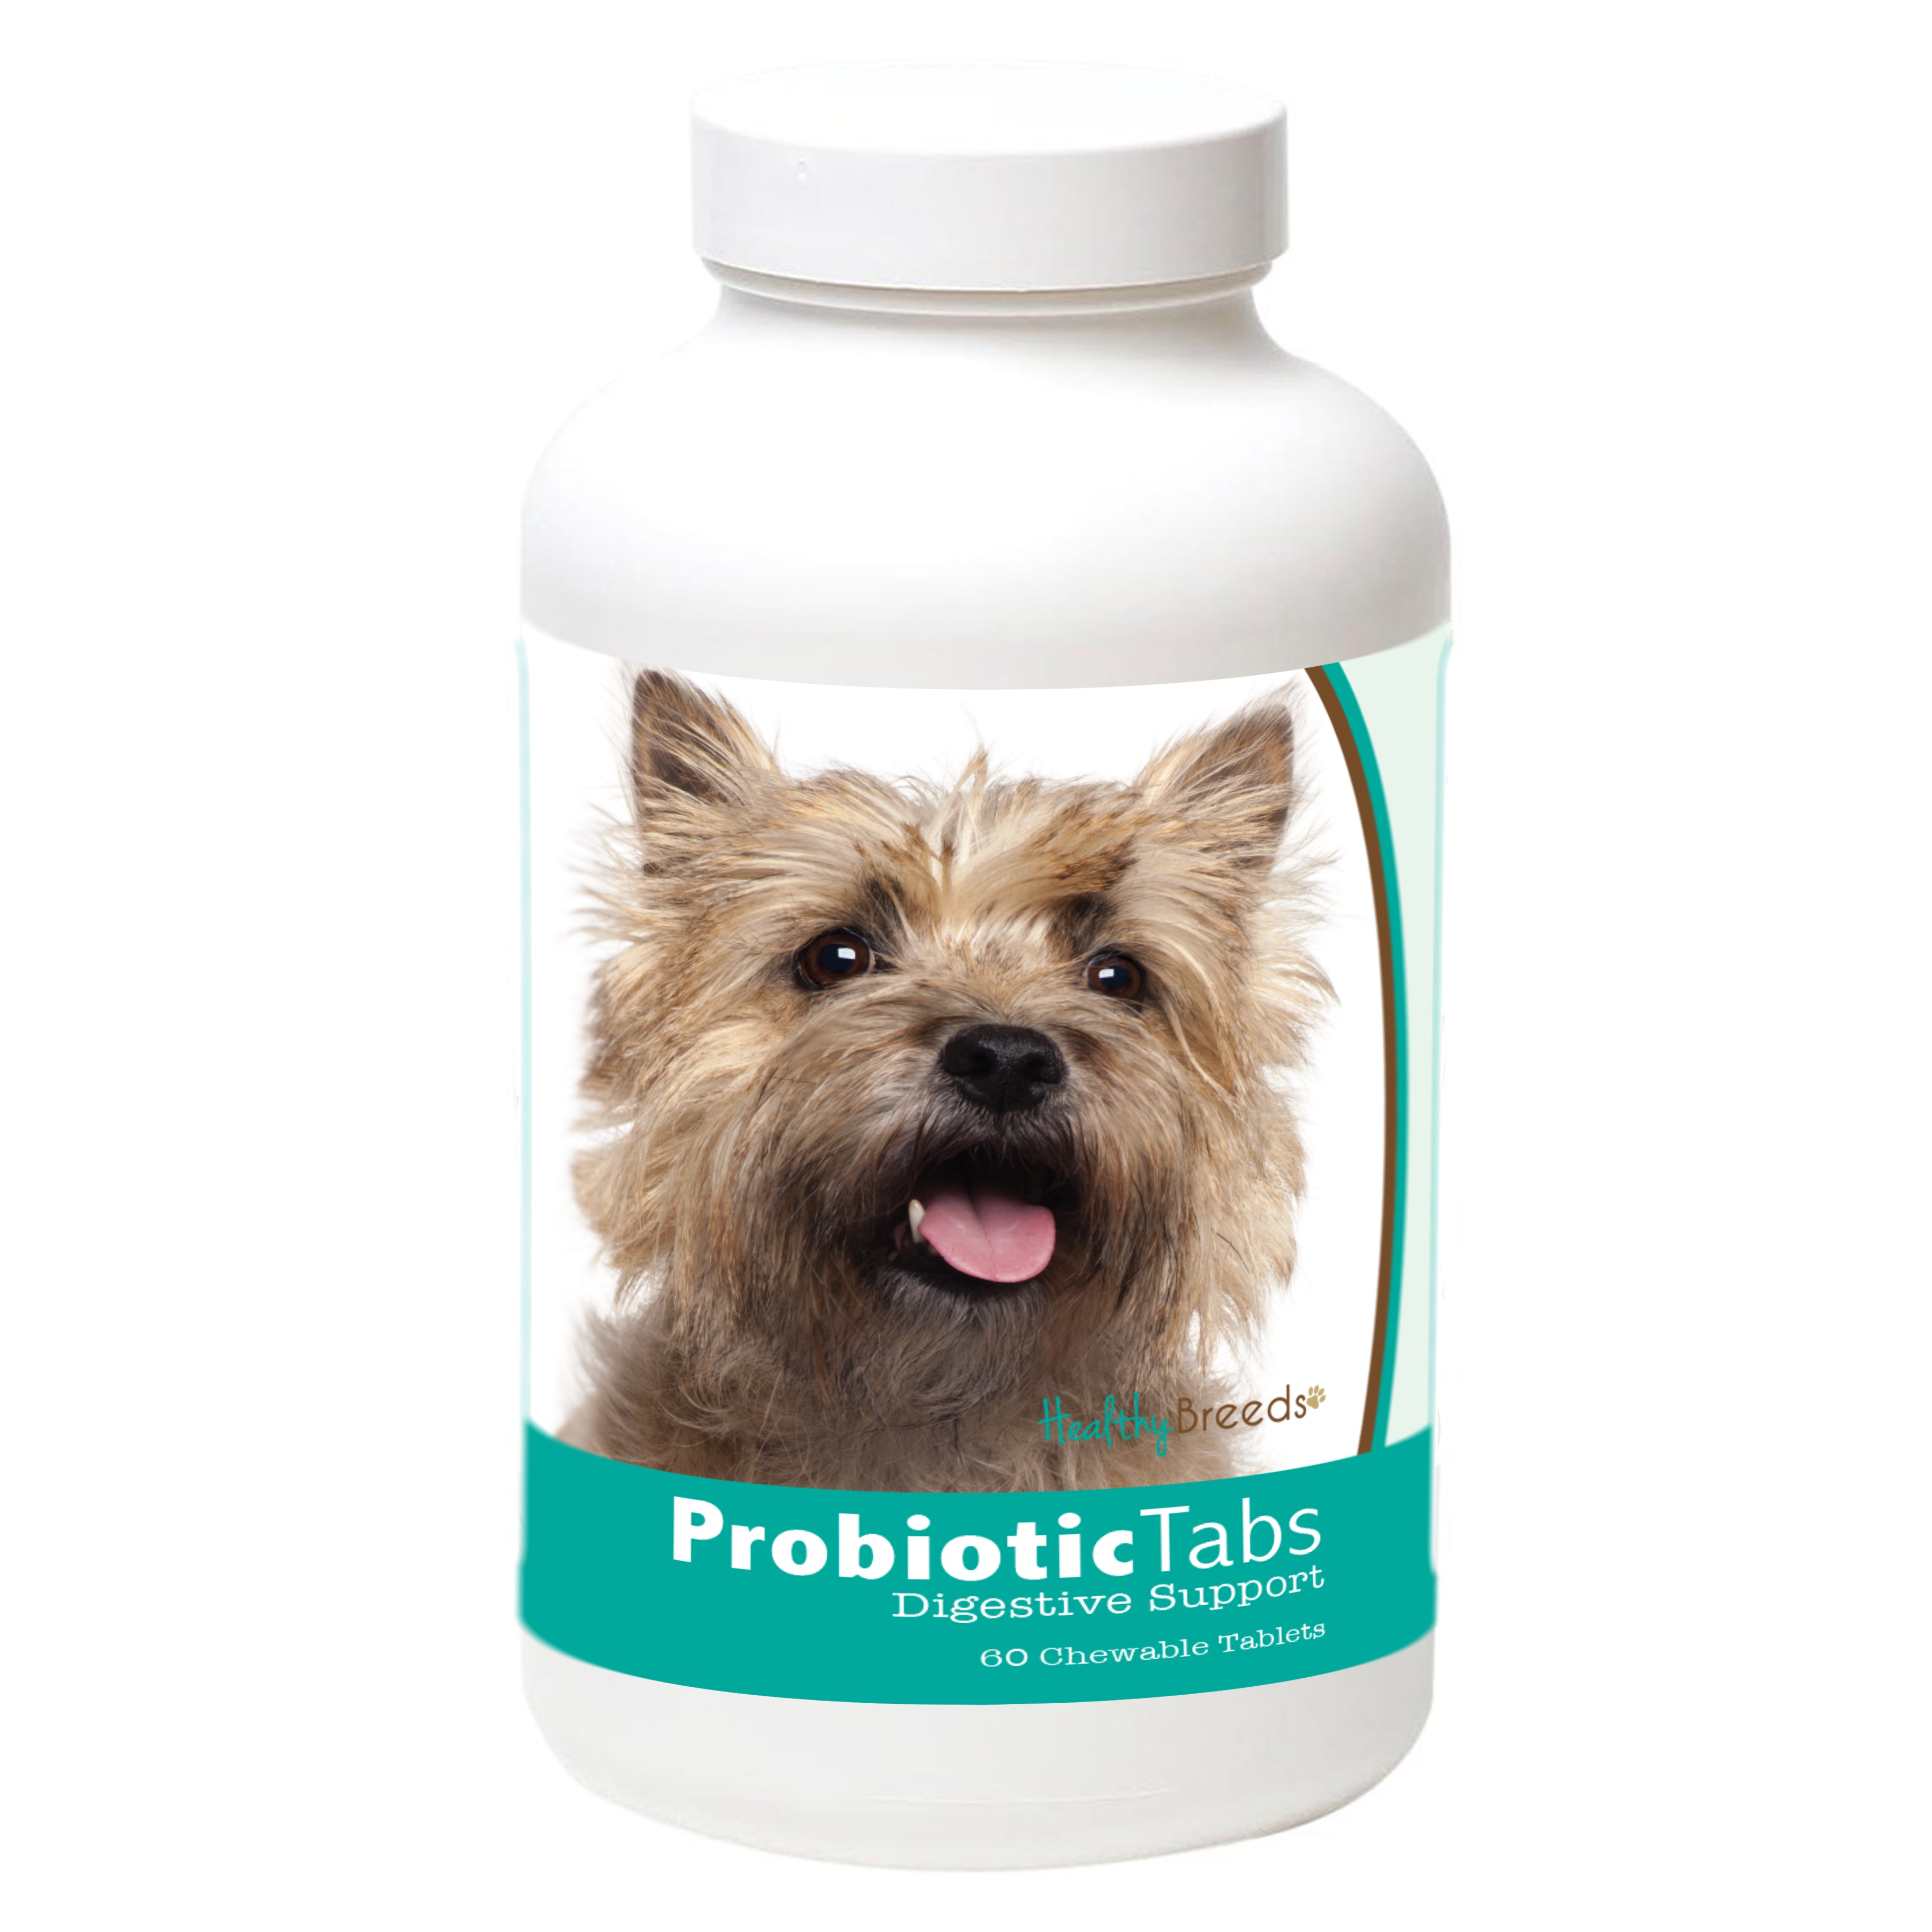 Cairn Terrier Probiotic and Digestive Support for Dogs 60 Count